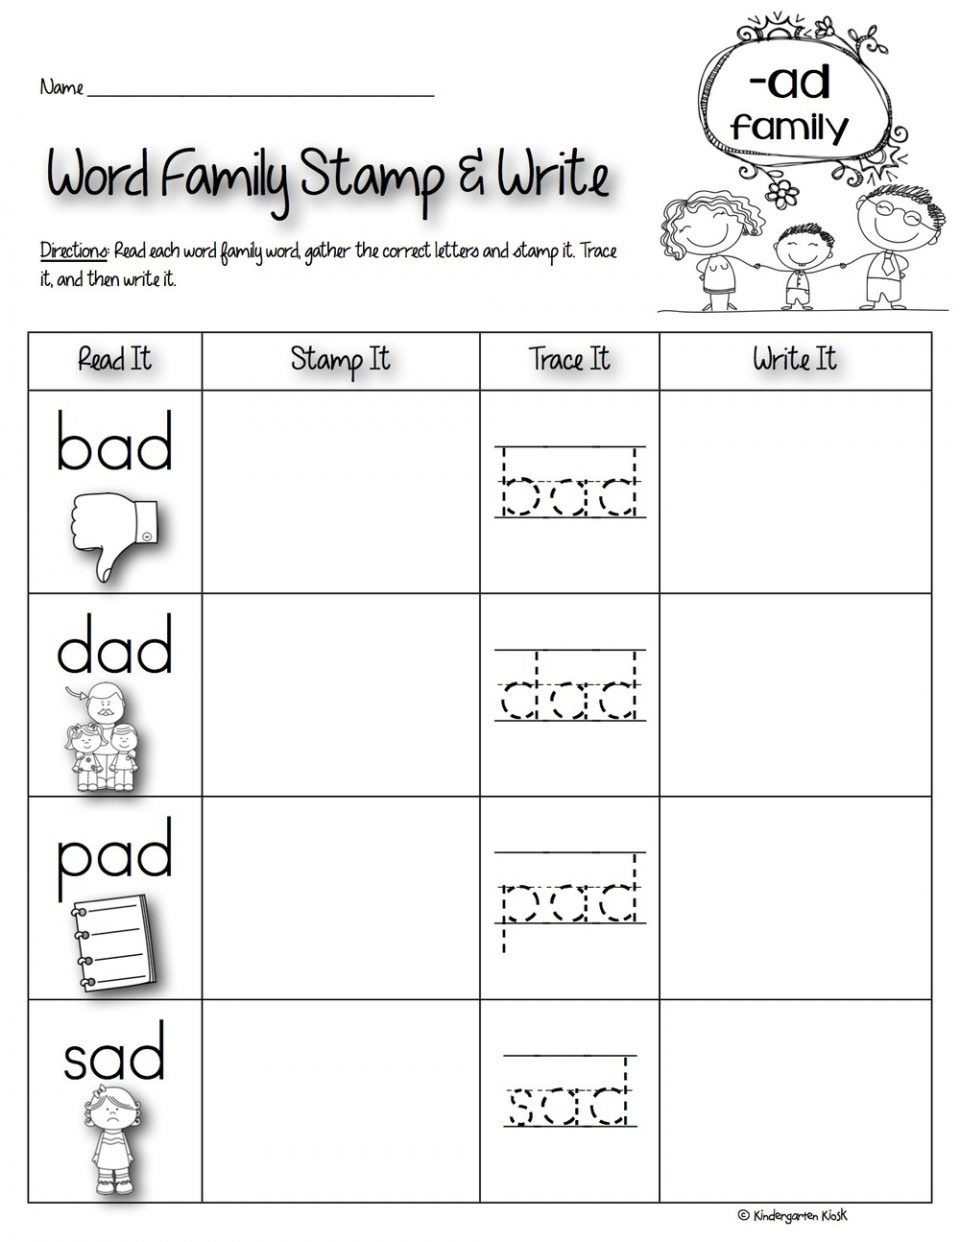 phonics worksheets for adults pdf db excelcom